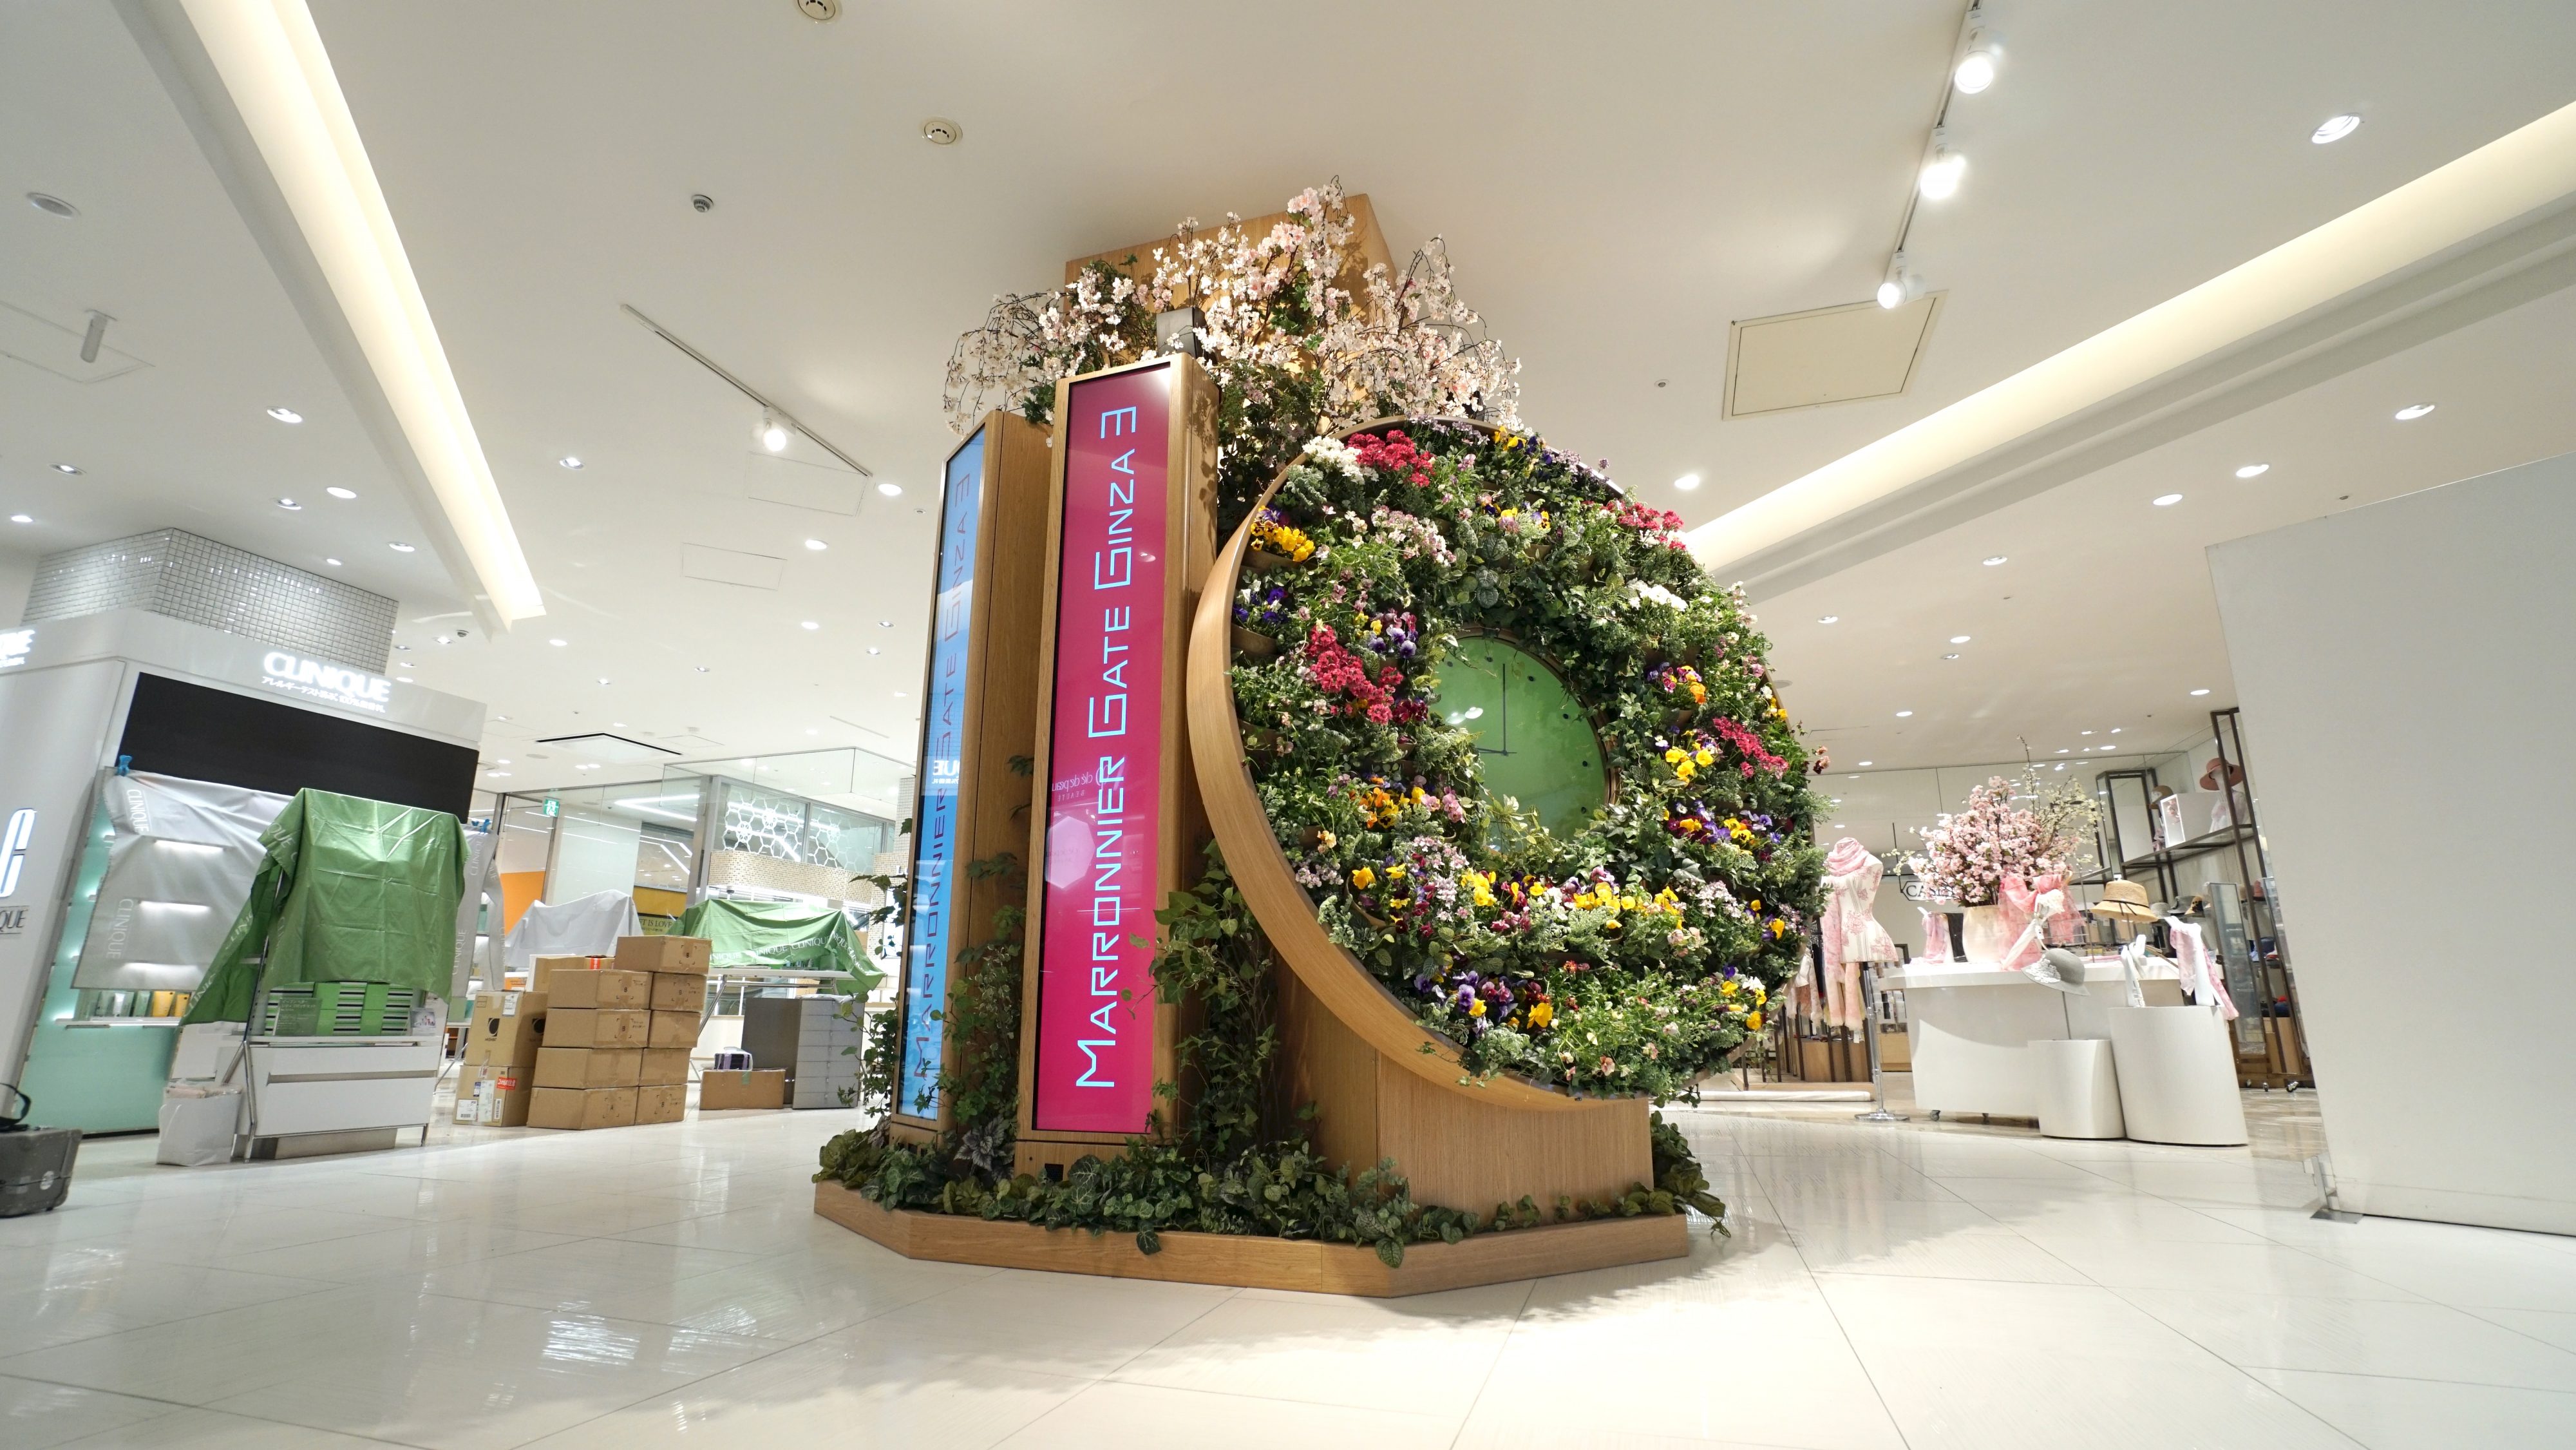 Produced the new flower clock “HANADOKEI” at Marronnier Gate2 Ginza